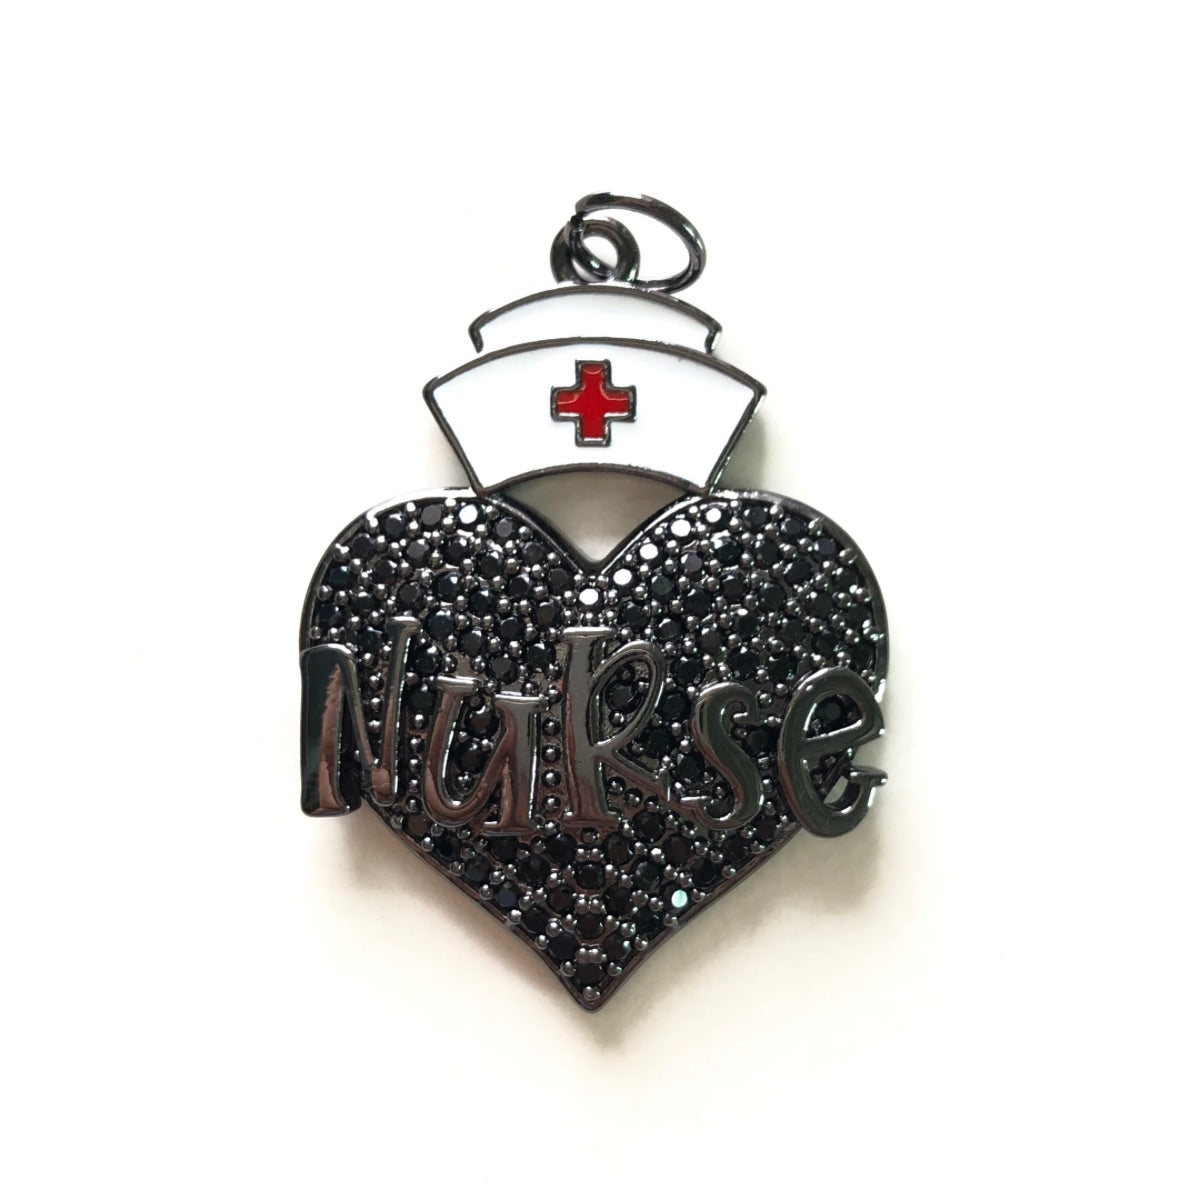 10pcs/lot CZ Pave Nurse Cap Heart Word Charms Nurse's Day CZ Paved Charms New Charms Arrivals Nurse Inspired Charms Beads Beyond